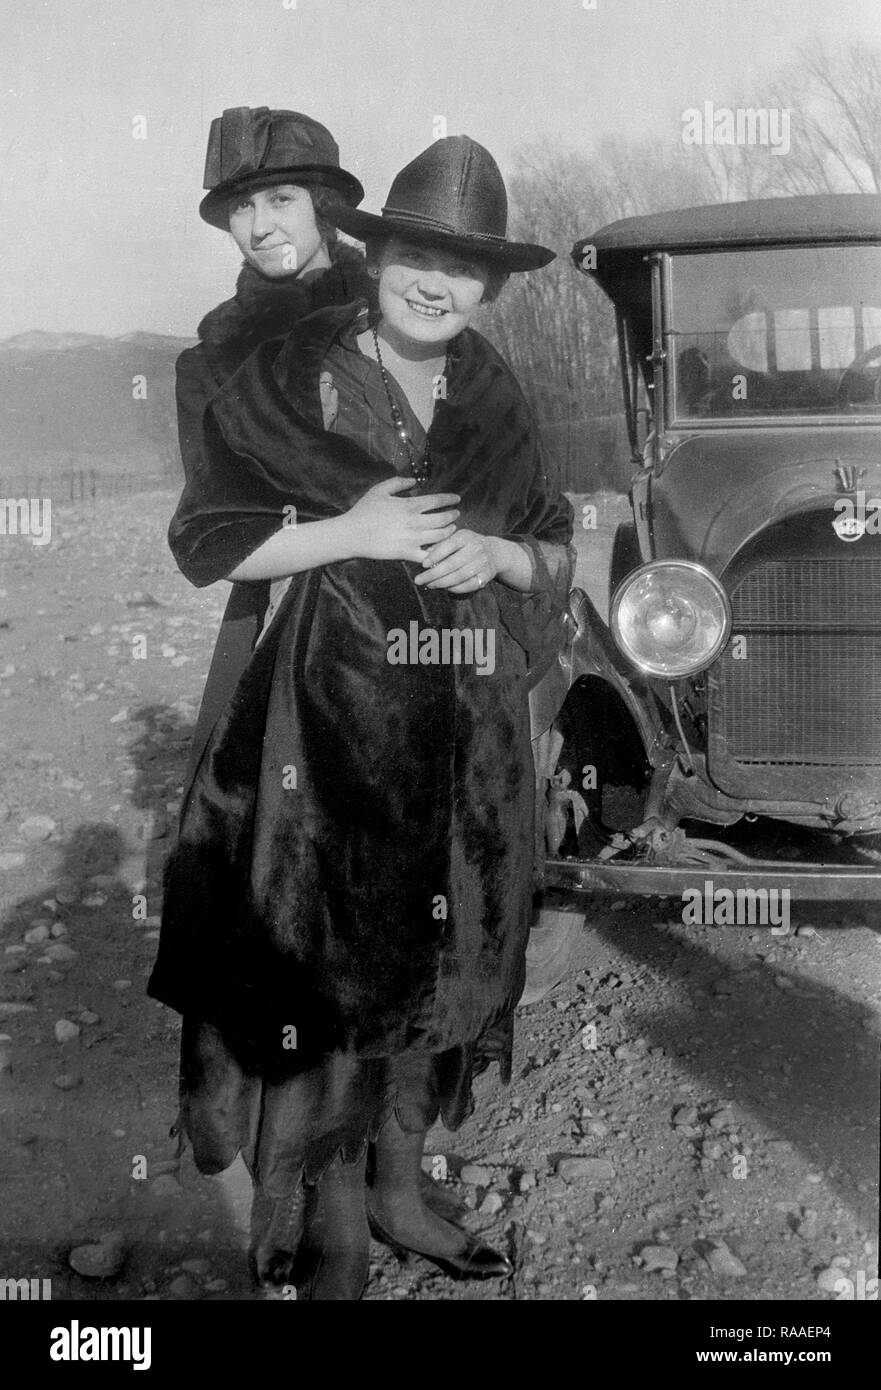 Two women hug while posing with their automobile along a Colorado road, ca. 1920. Stock Photo